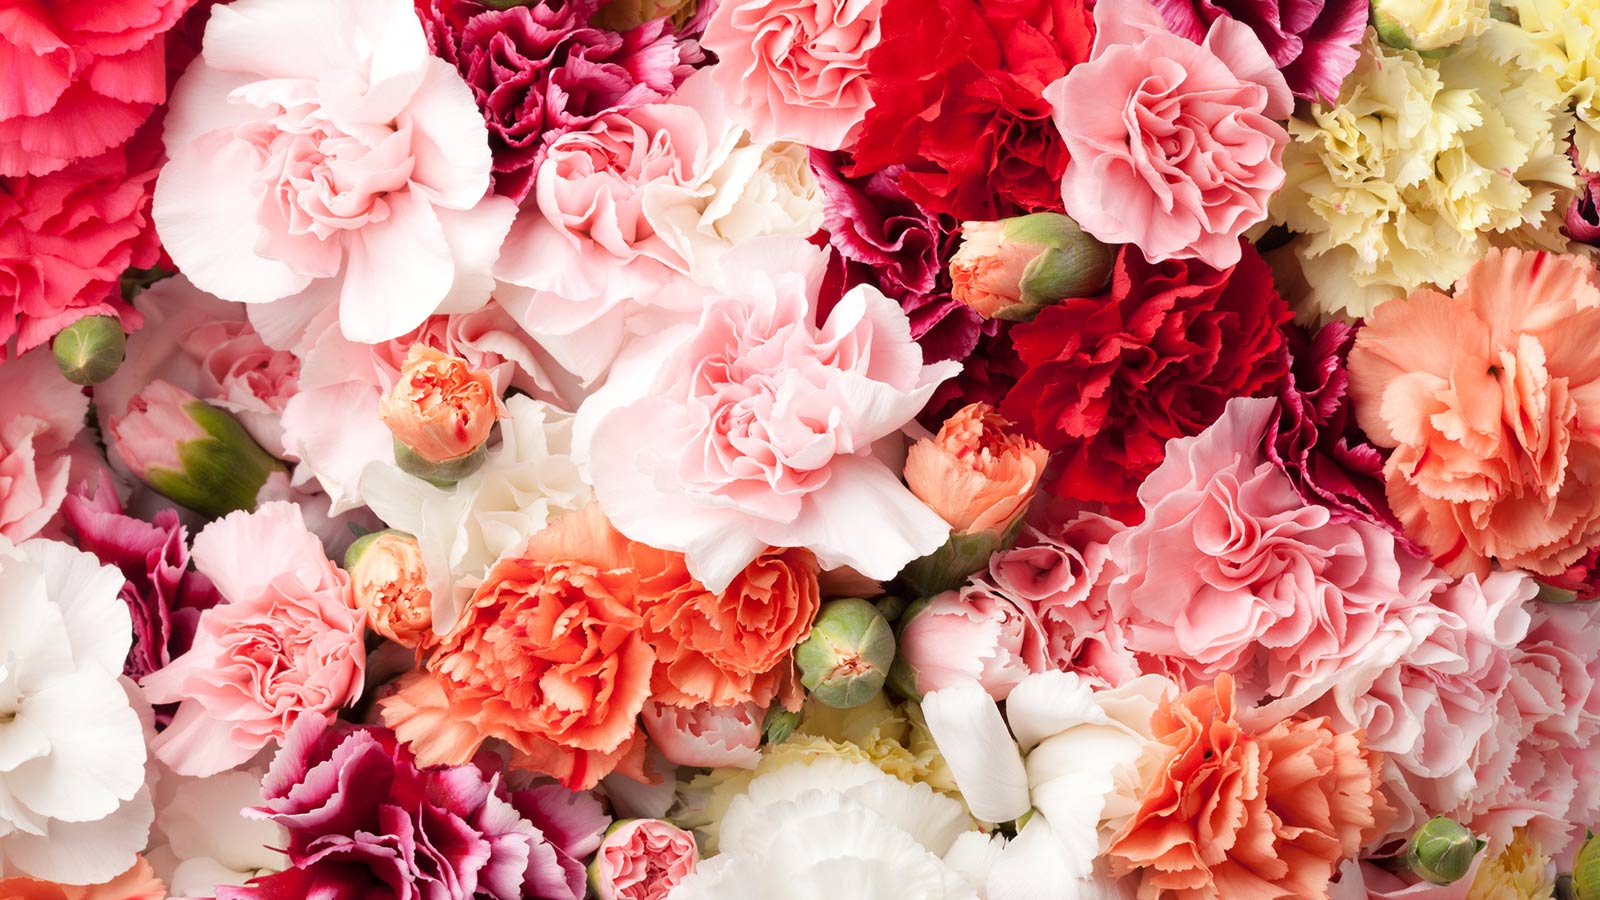 bunches of colourful carnations close up